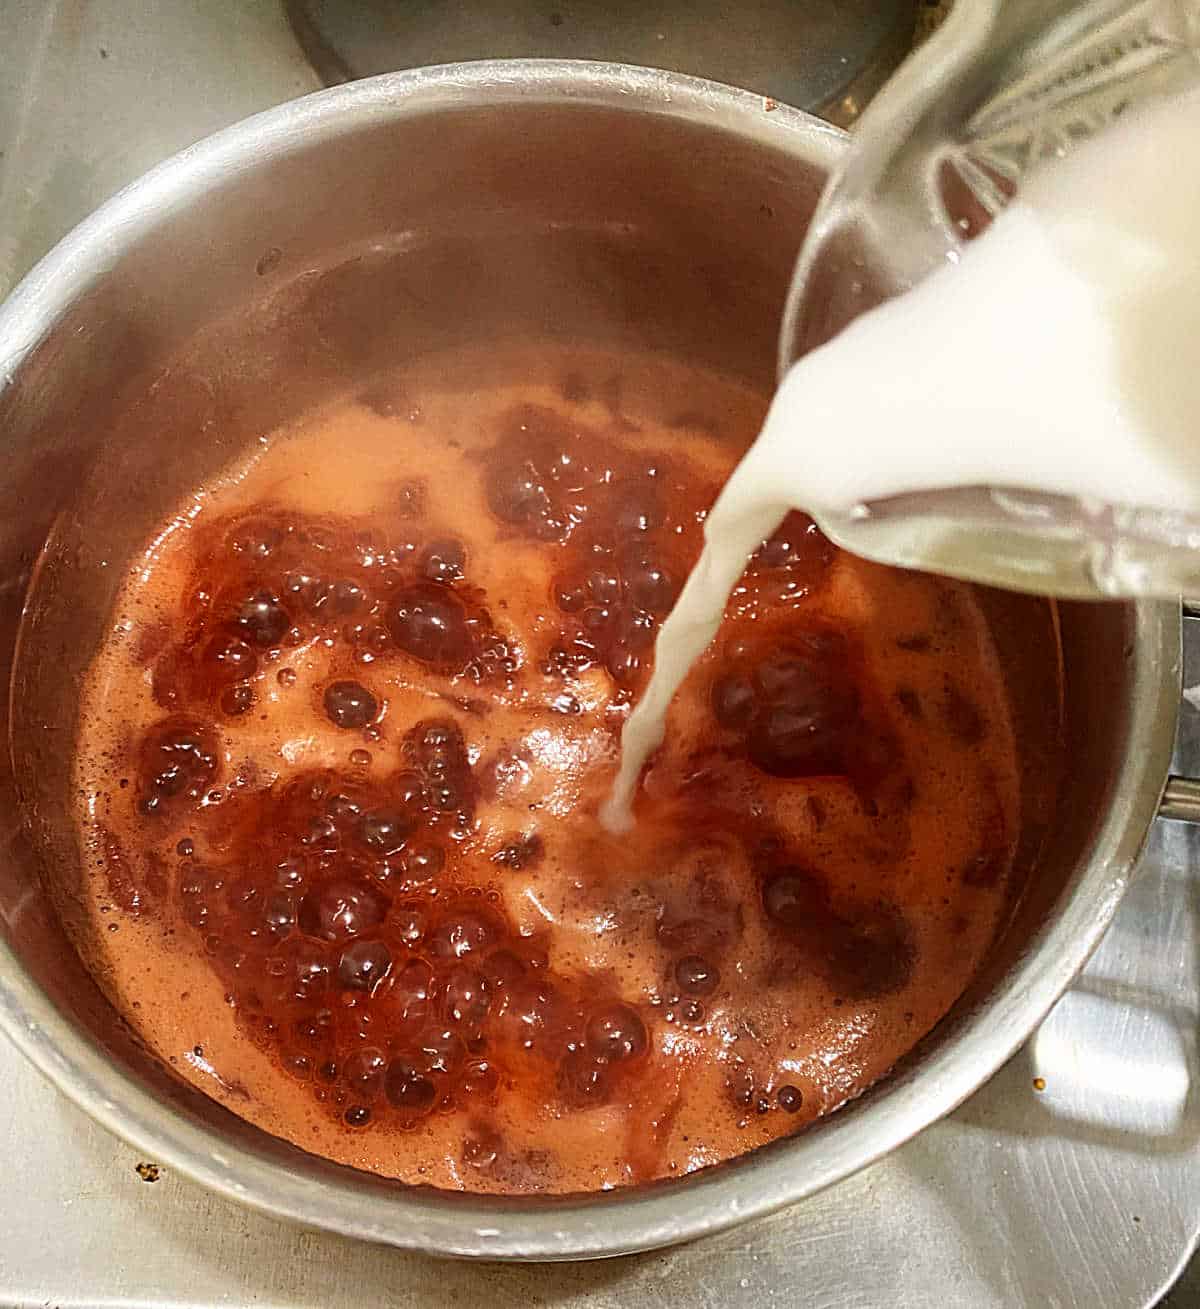 Adding white liquid to saucepan with boiling stawberries and liquid